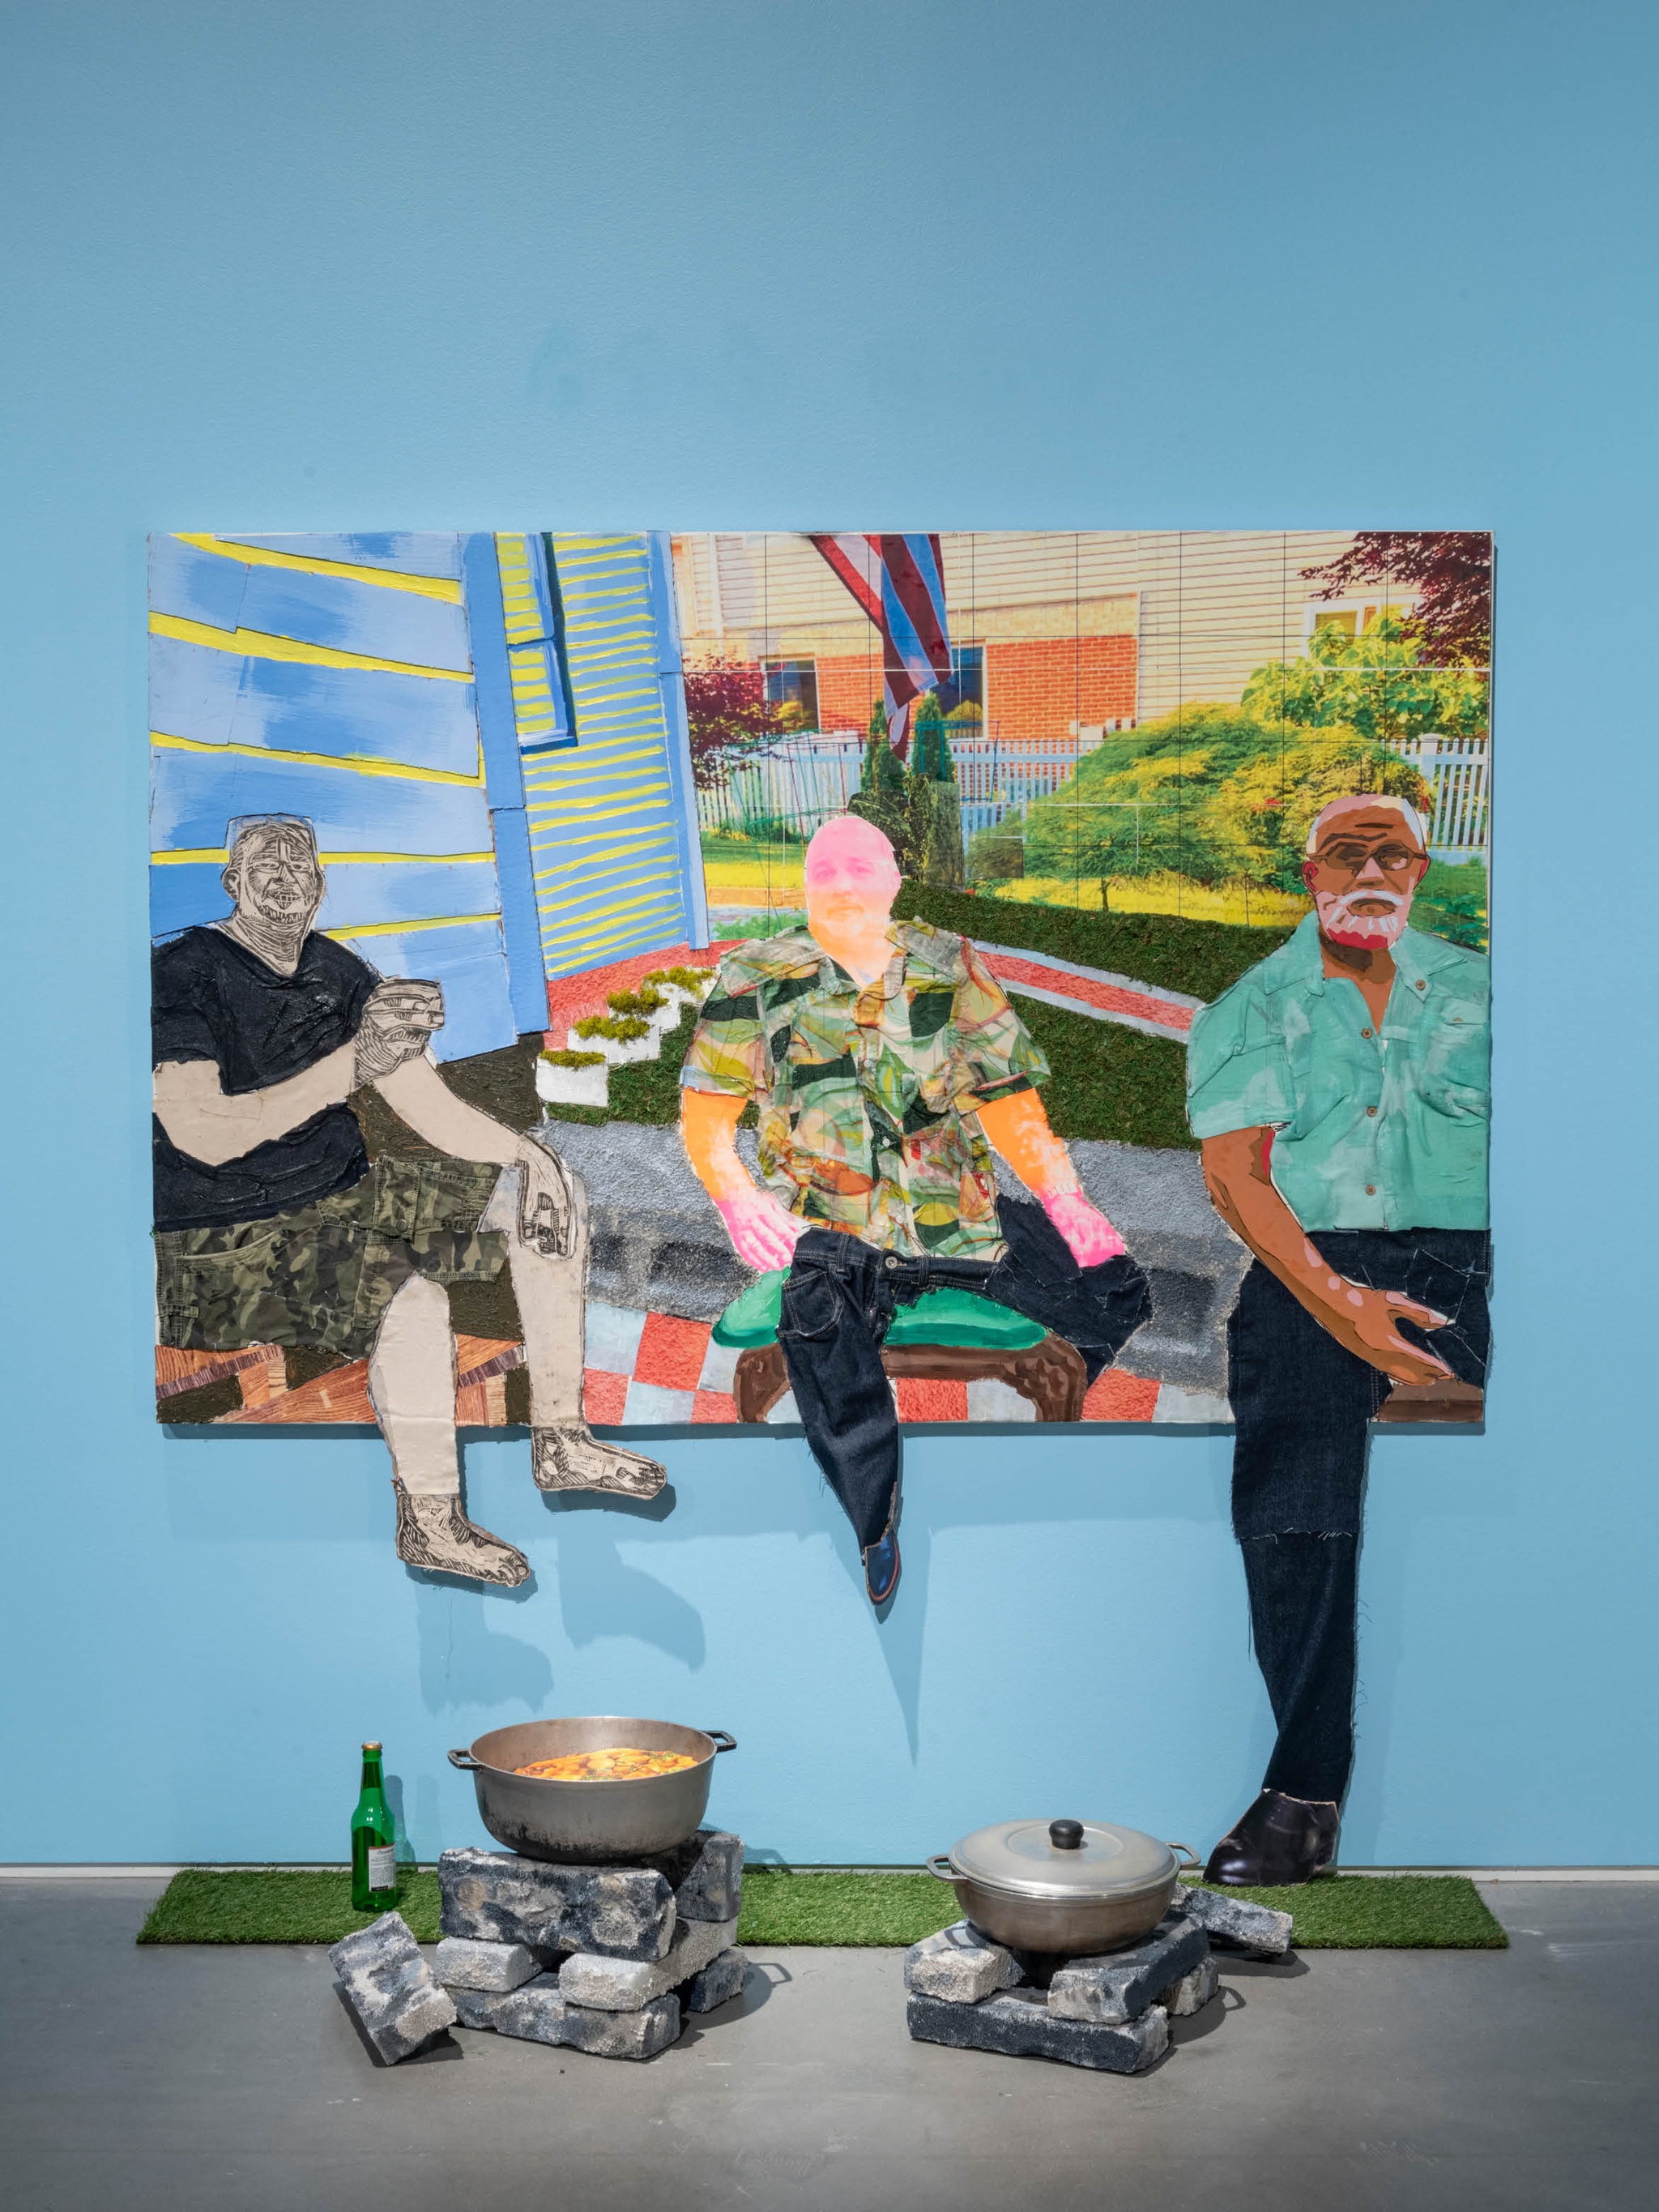 A mixed media painting depicting three Dominican men in a backyard in Yonkers, New York. The men each face the viewer, and elements on the painting extend down off the canvas onto the wall and floor. The men's legs all extend off the canvas. One of them touches the floor of the gallery, where a carpet of astroturf has been installed with metal pots on bricks representing the way the Dominican men are cooking food in the backyard.